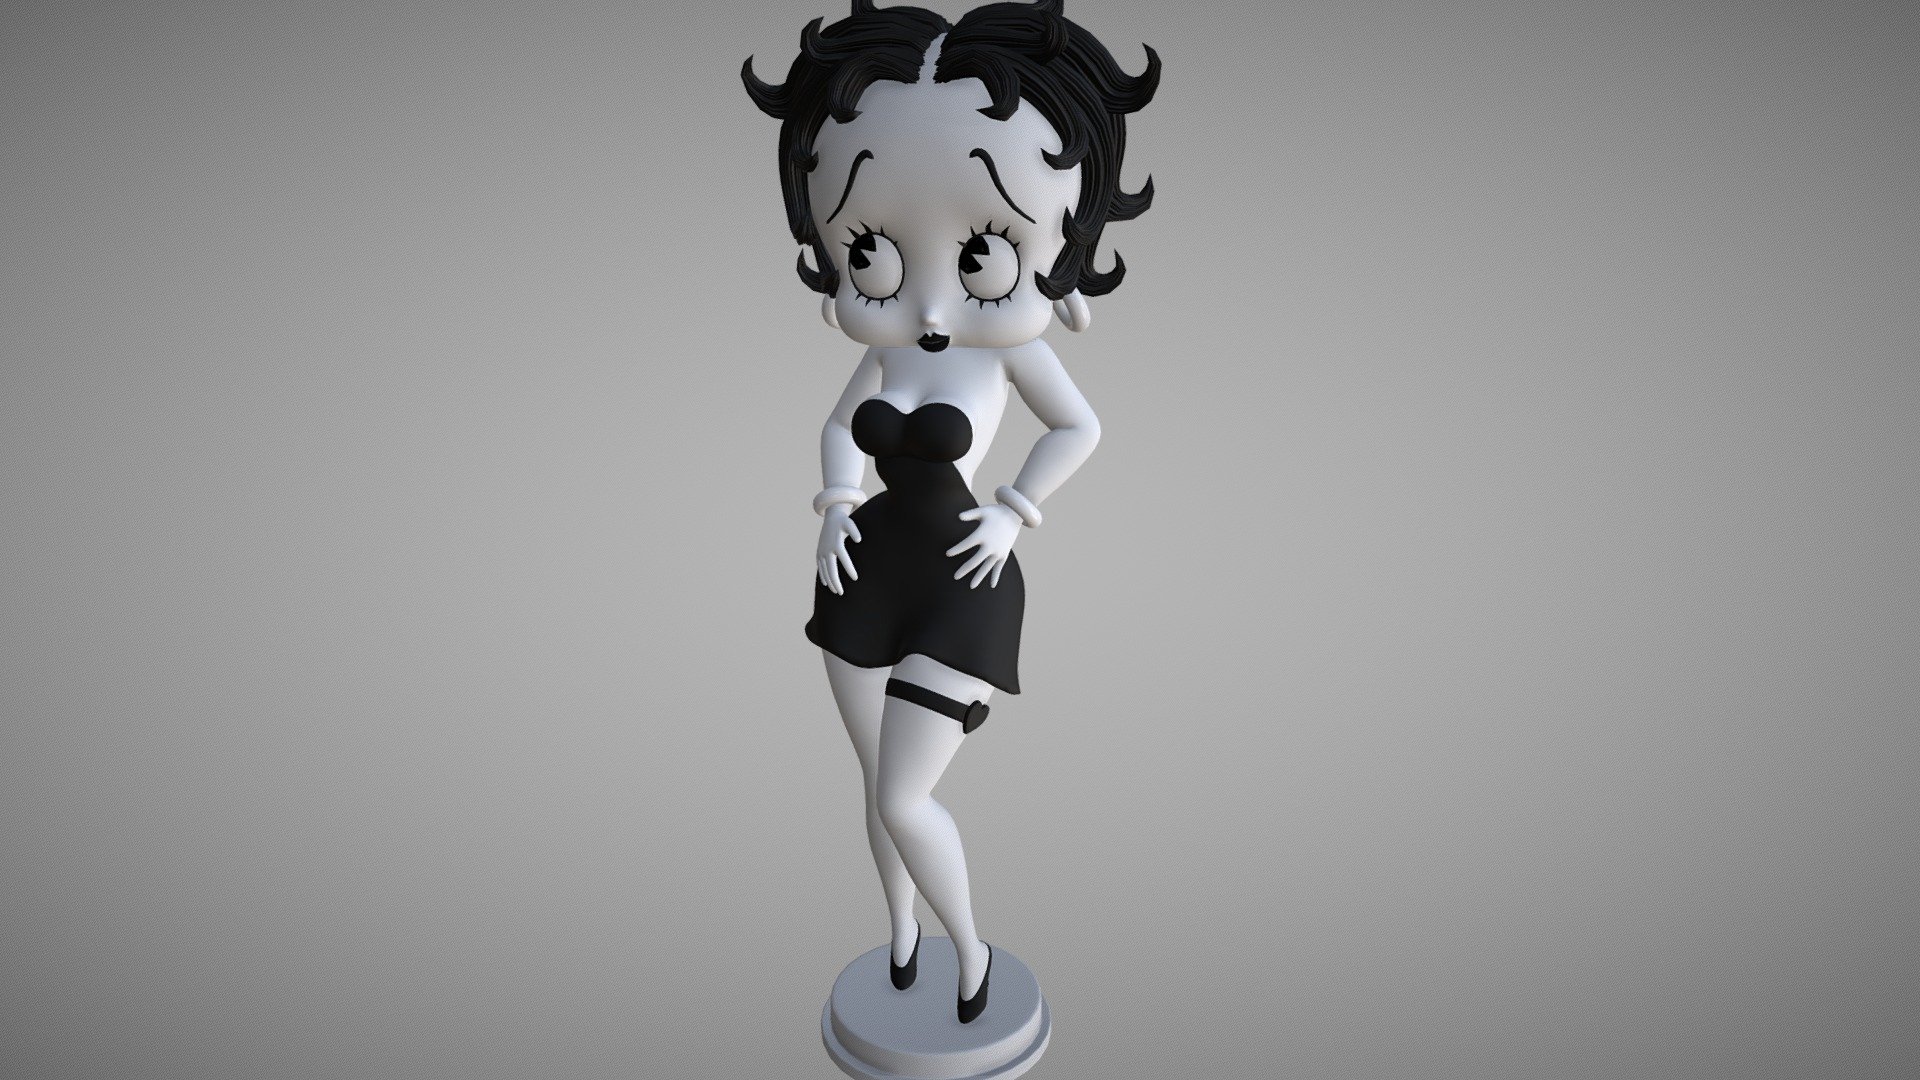 3D version of Betty Boop, I tried to translate the 2D animated cartoon to a 3D model.

Do you want me to do a 3D model for you? See my gig on fiver:
https://www.fiverr.com/share/lrQWPe - Betty Boop - Download Free 3D model by Everton Bohnenberger (@BOHNEN) 3d model